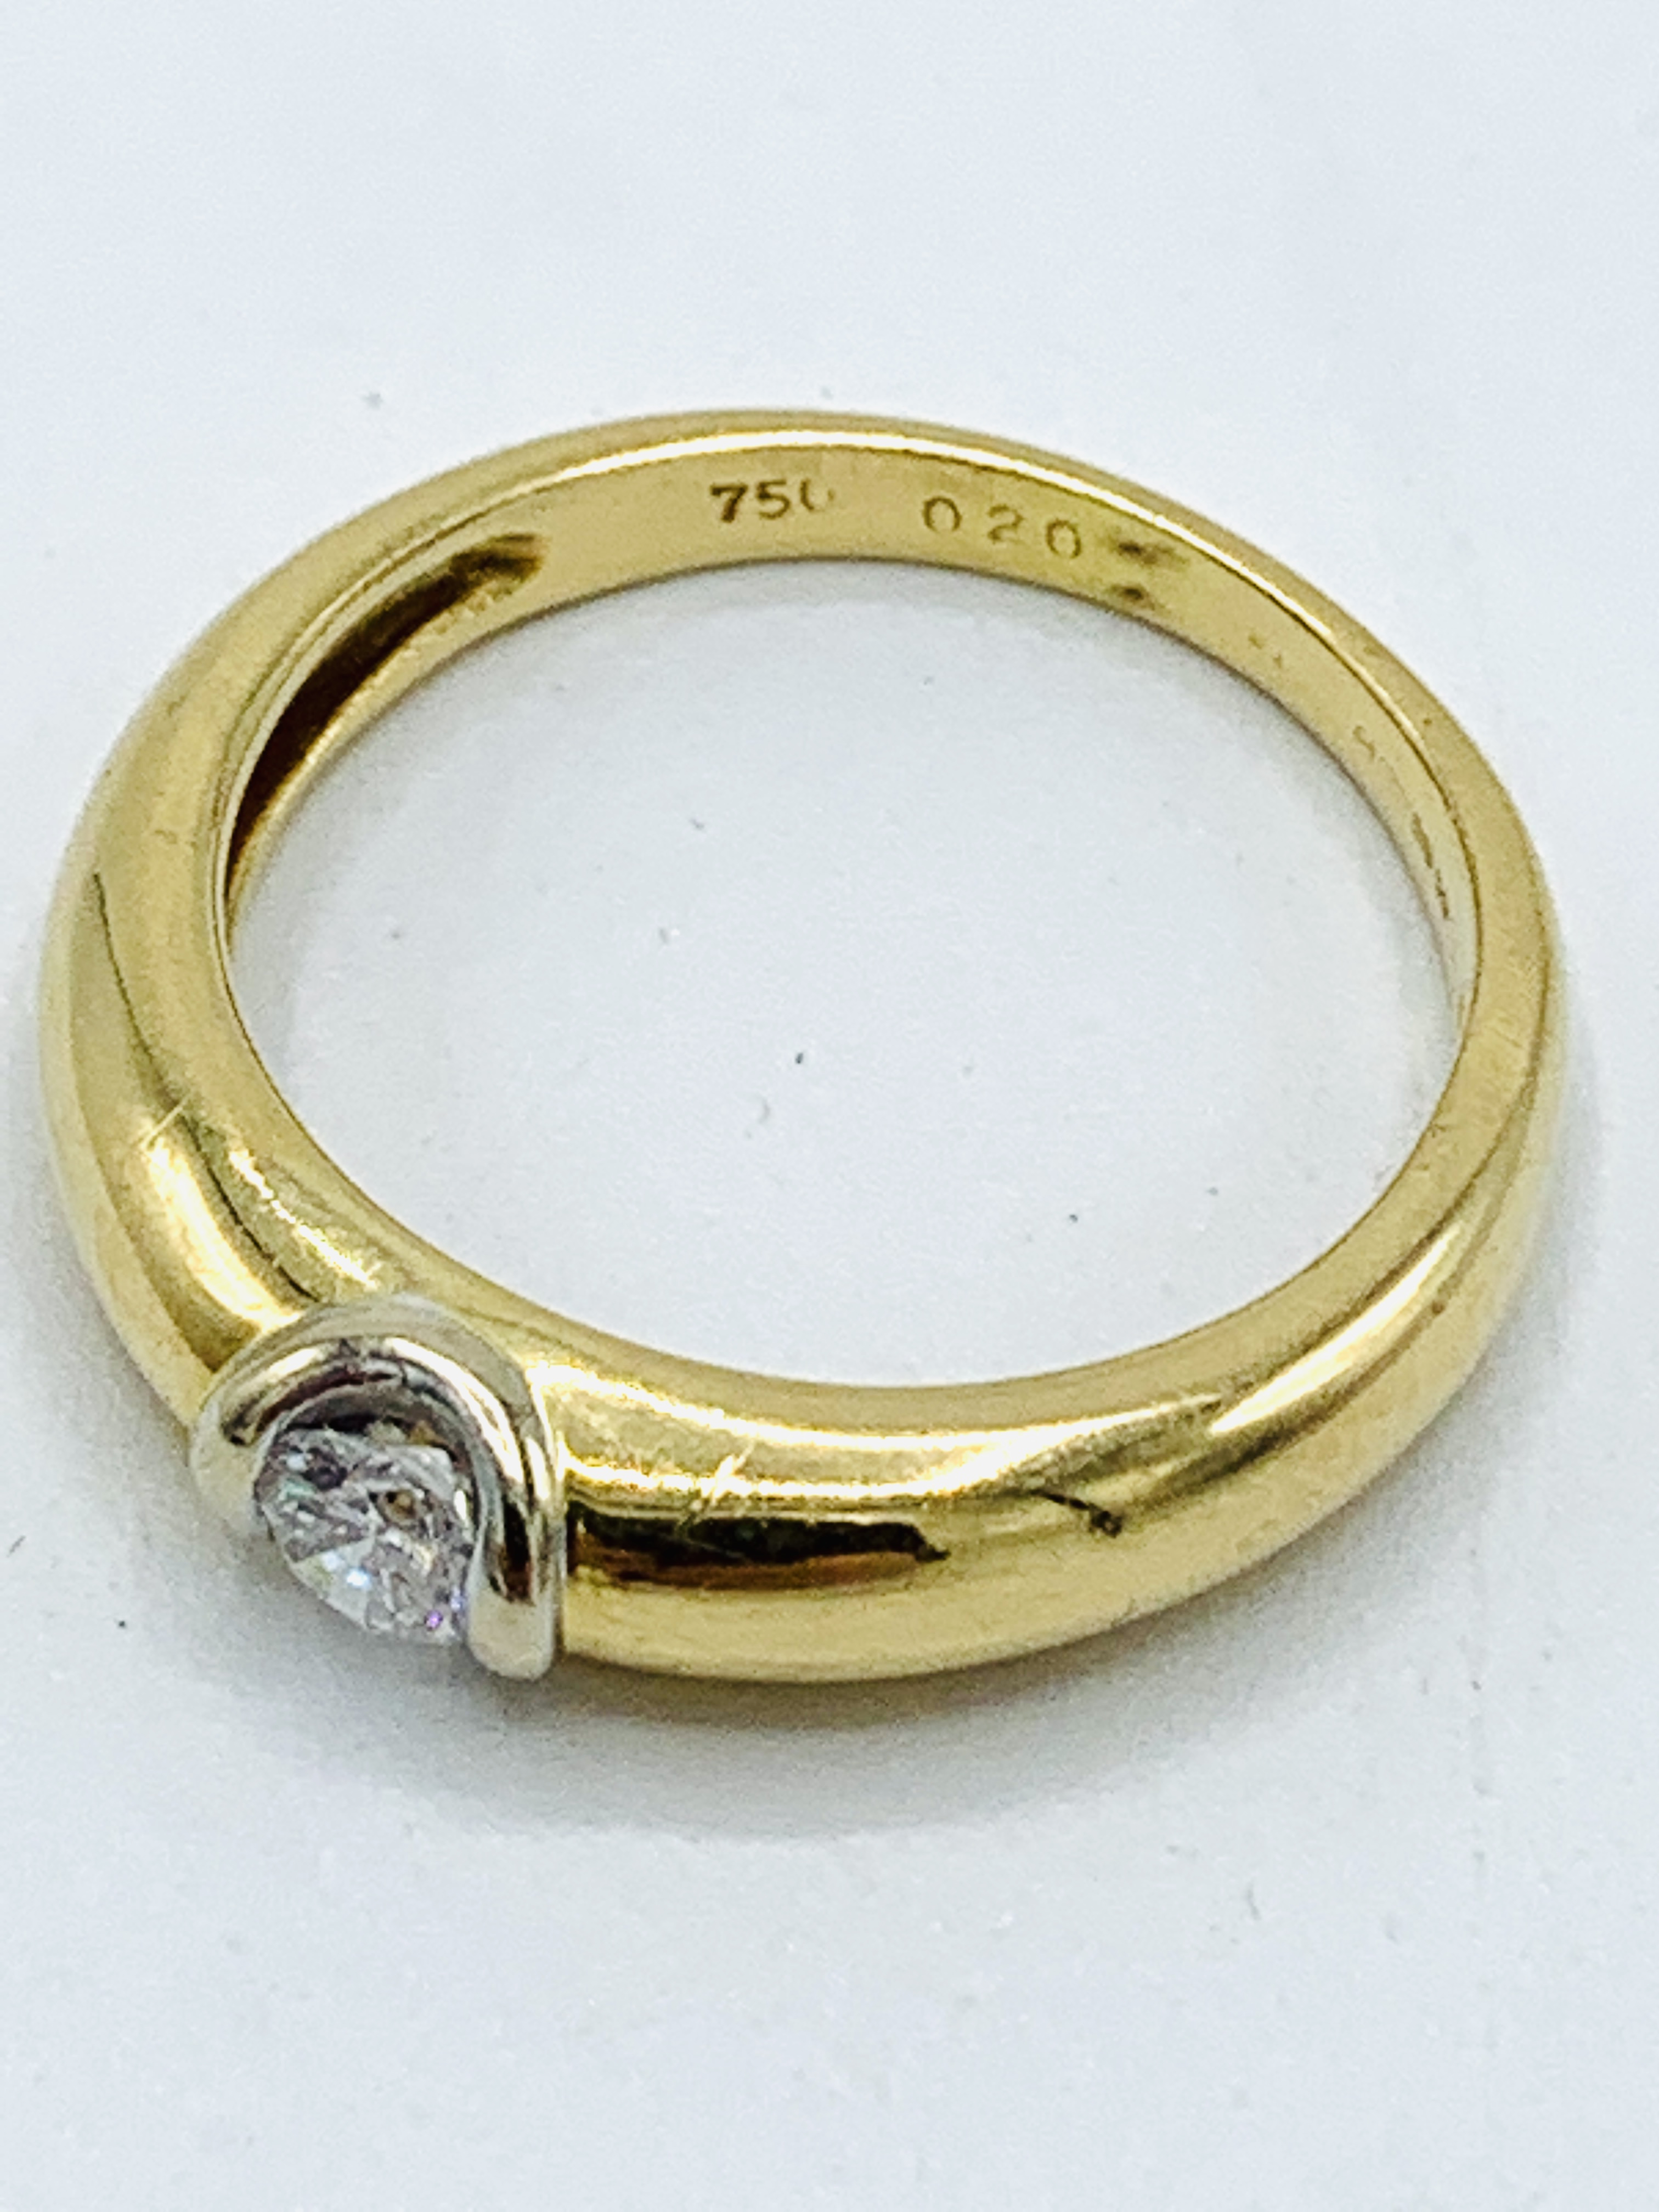 18ct gold solitaire diamond ring - Image 2 of 4